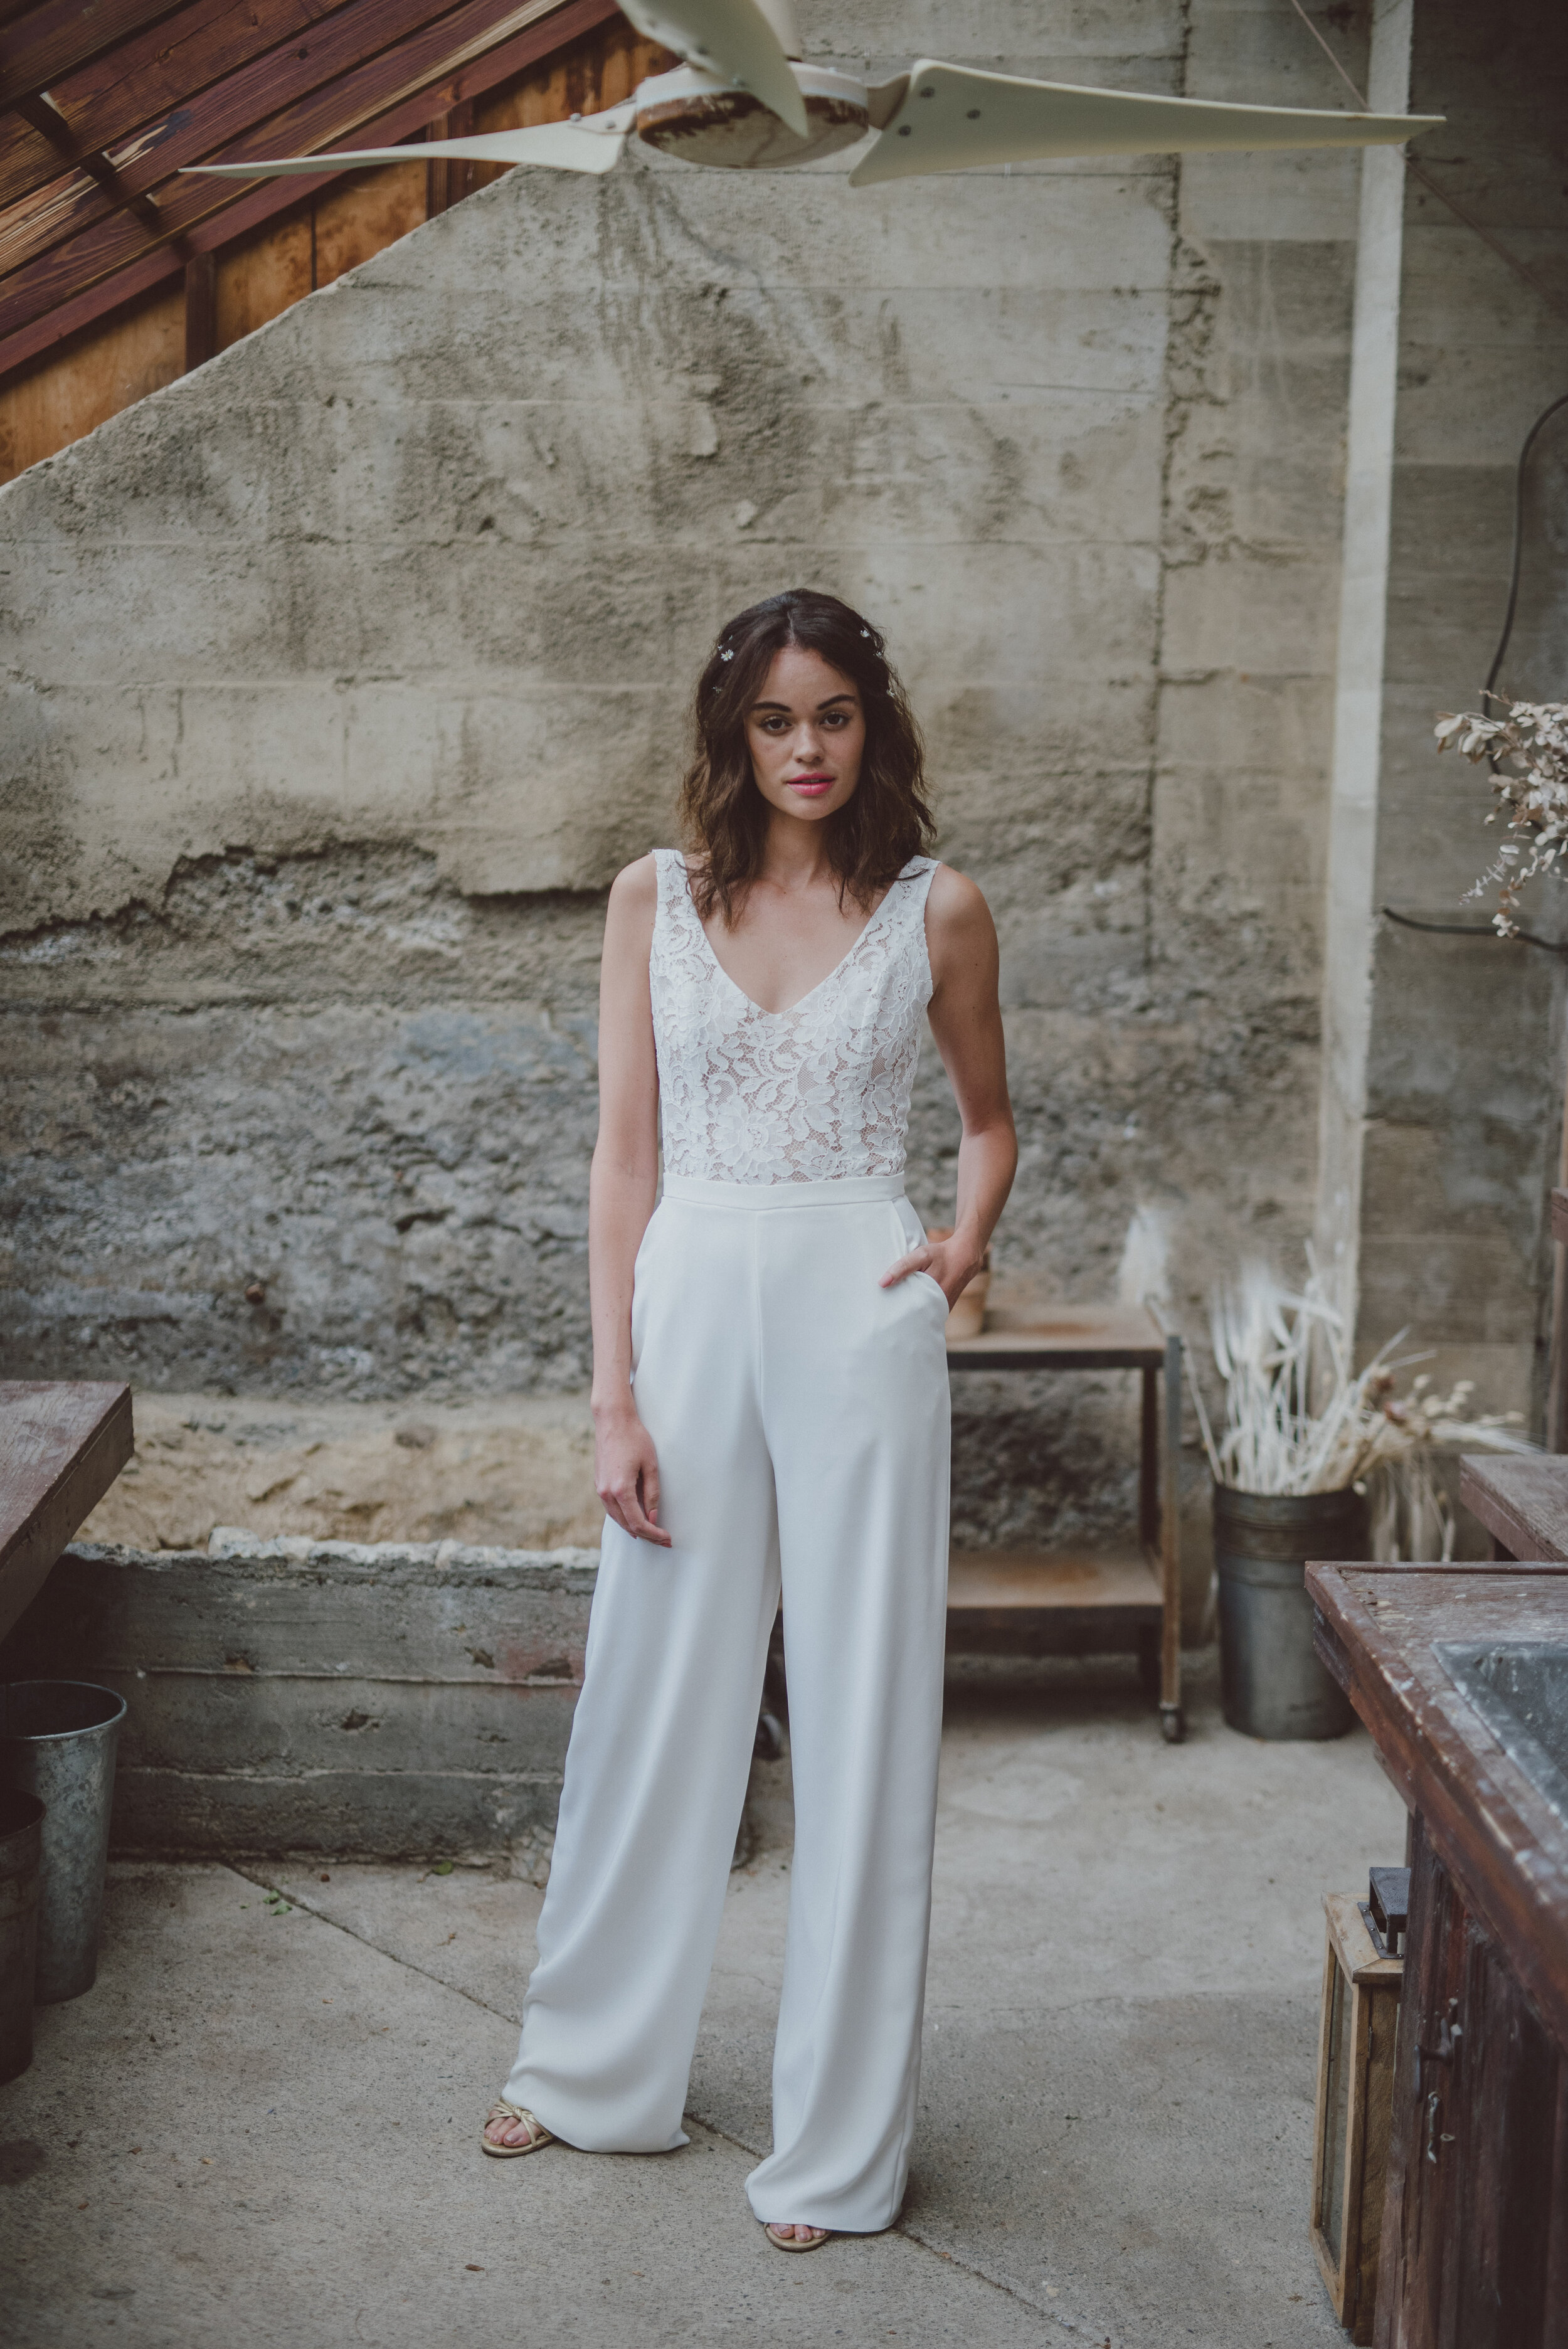 22 Stylish Bridal Separates and TwoPiece Wedding Gowns We Love